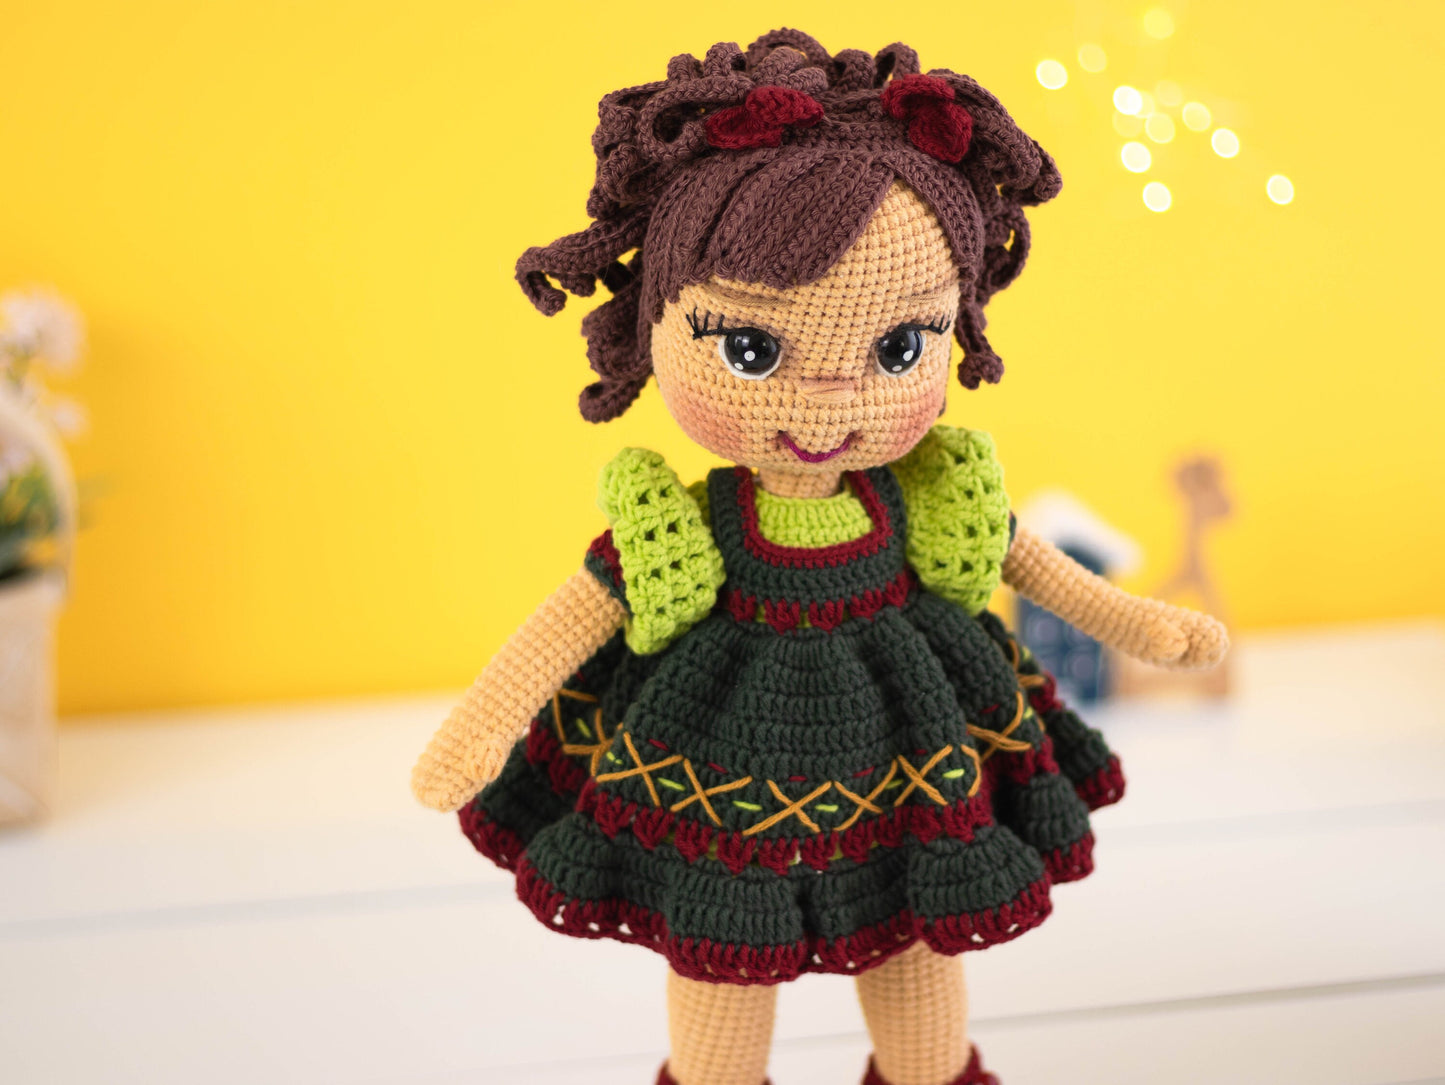 Crochet Doll Chloe with Clothes, Amigurumi Doll for Sale, Knit Doll with Hair